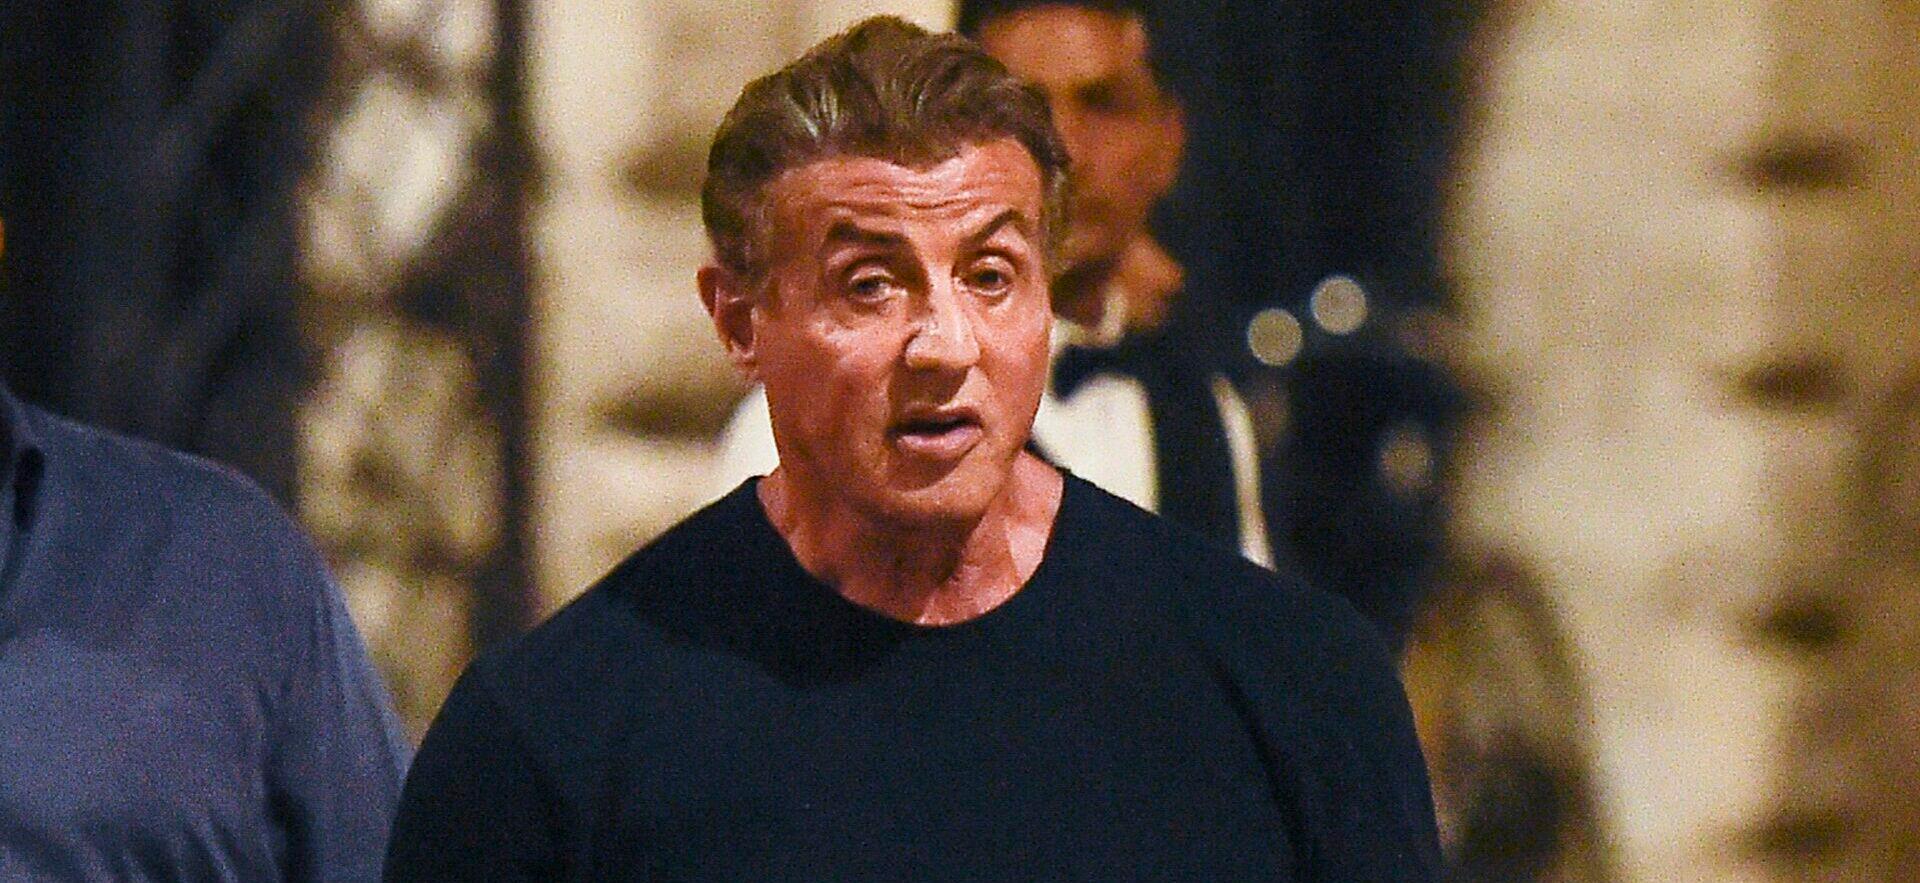 Sylvester Stallone goes dinning out with wife and daughter then visiting an art gallery.Set 2